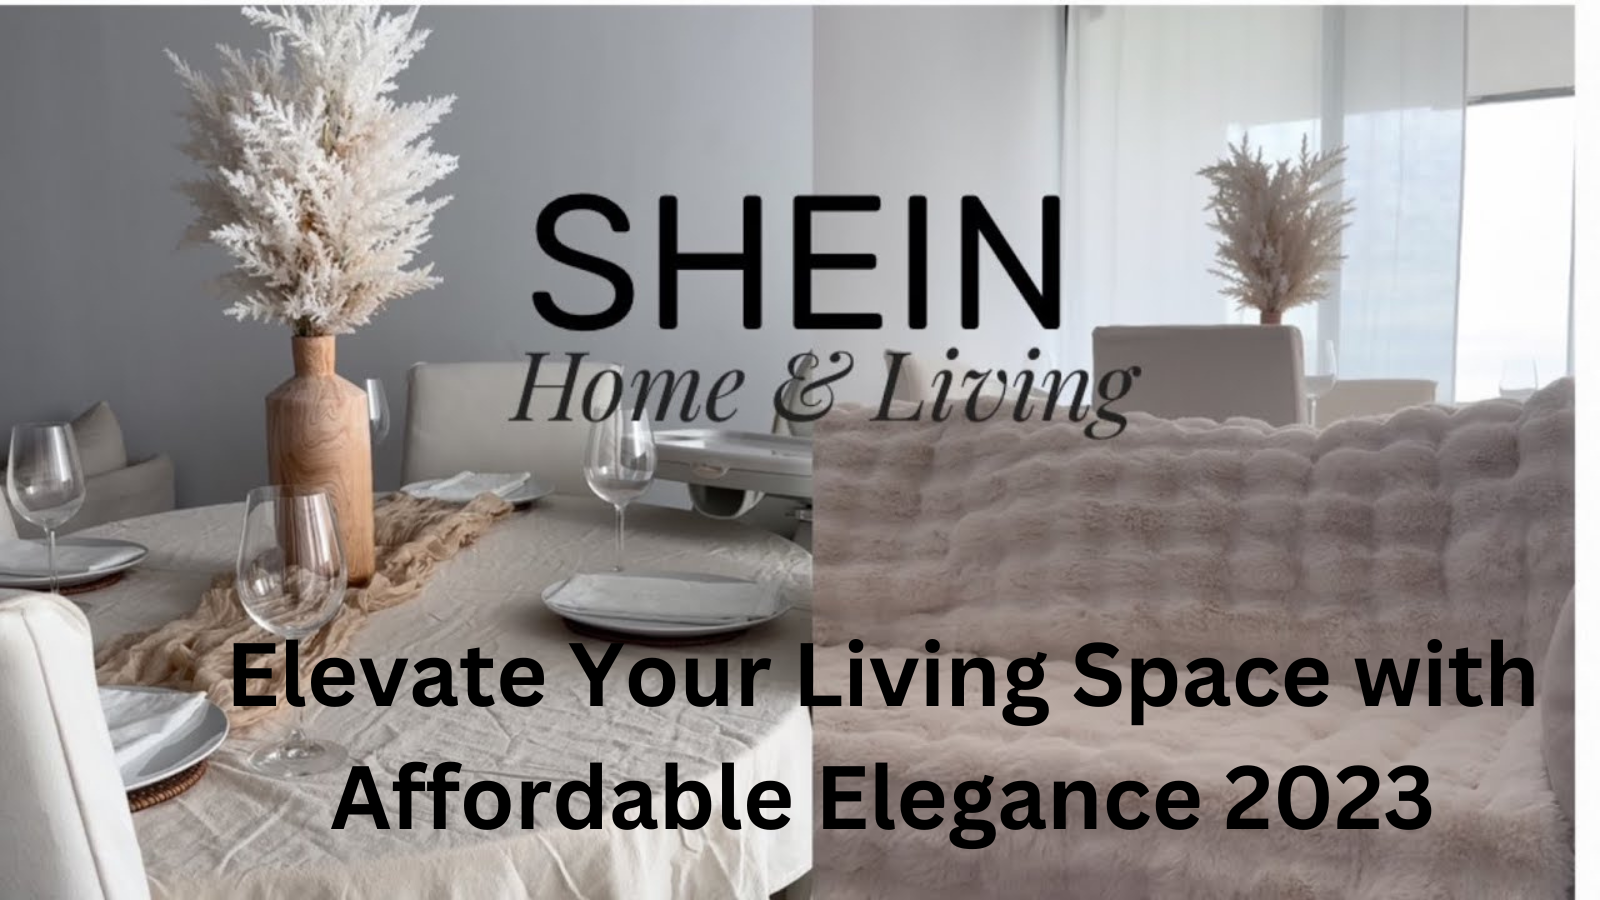 Shein Home Decor Elevate Your Living Space with Affordable Elegance 2023